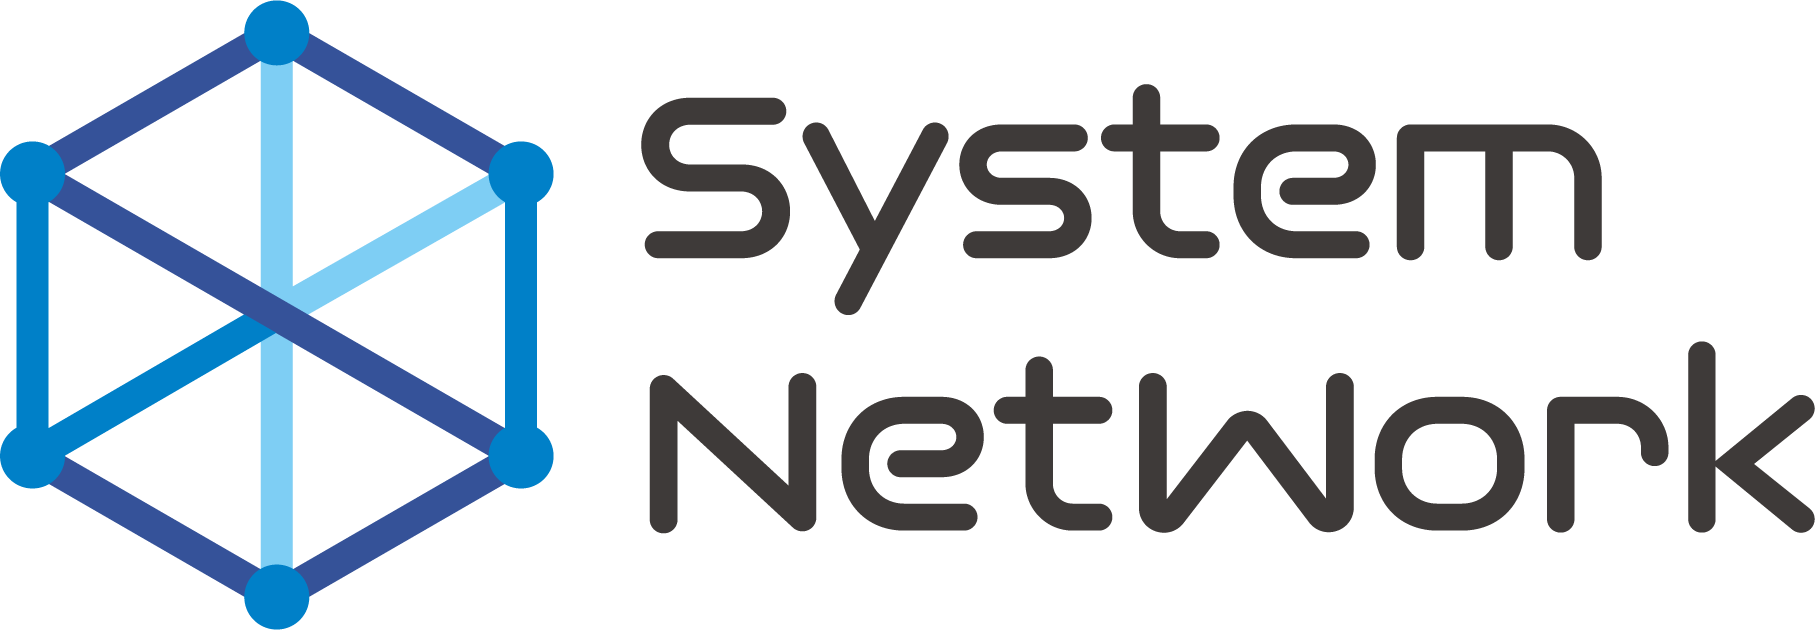 SystemNetwork